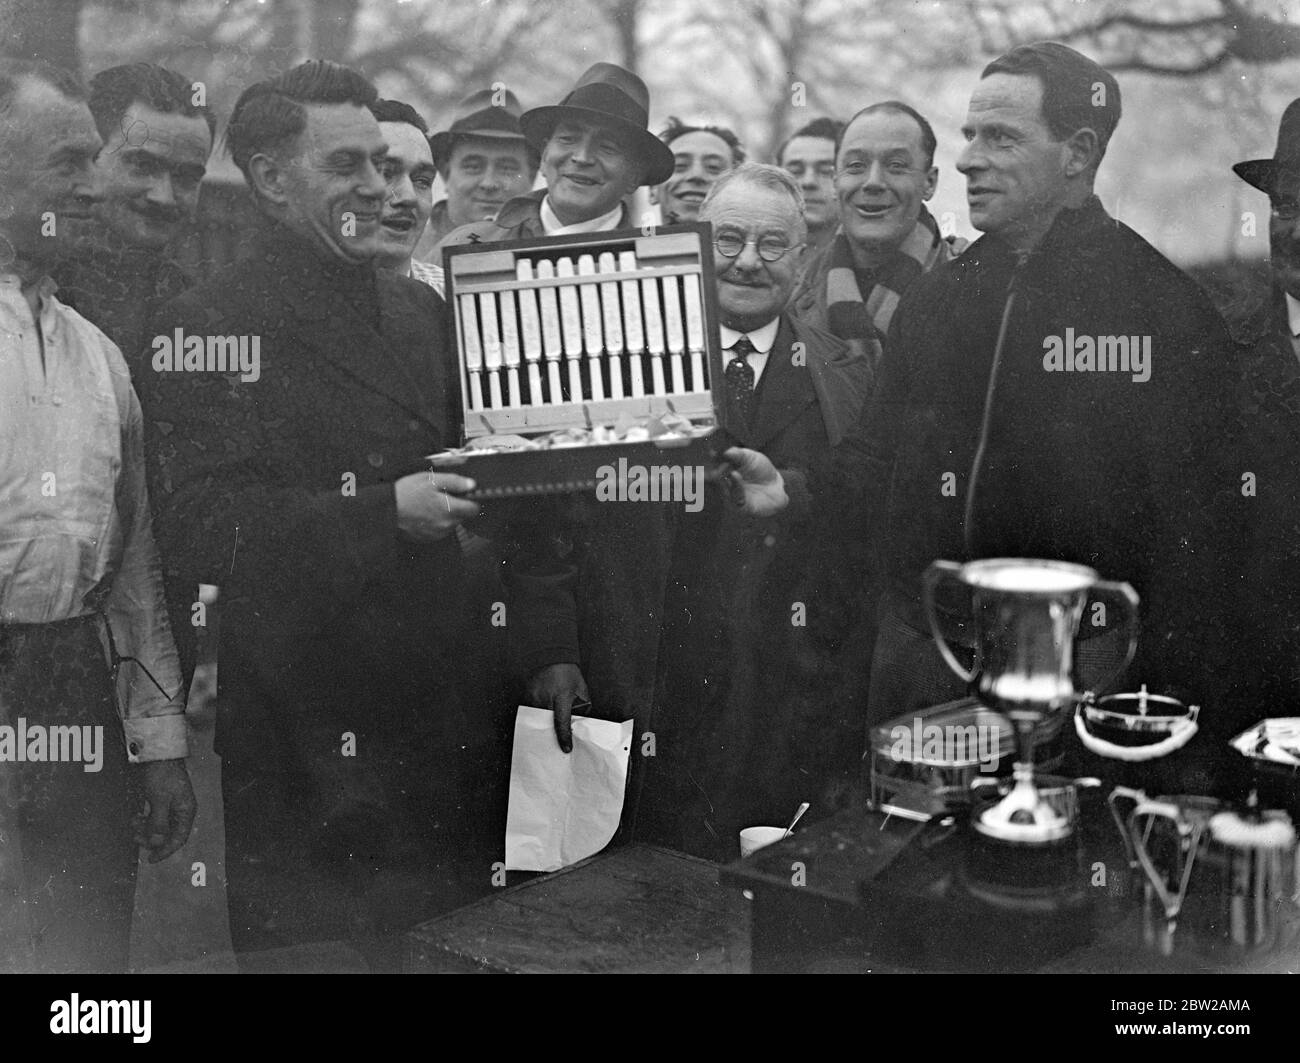 Serpentine swimmer receives canteen of cutlery for braving the 'cutting' cold. Despite the severe early morning cold, Hardy, members of the Serpentine Swimming Club took part in the final race of the winter competition in the Serpentine, Hyde Park. The winner was Reginald Pike, who received a canteen of cutlery. Photo shows, Mr A I Greenbury, President of the Serpentine Swimming Club (left) , presenting the canteen of cutlery to Reginald Pike, winner of the winter competition. 18 December 1937 Stock Photo